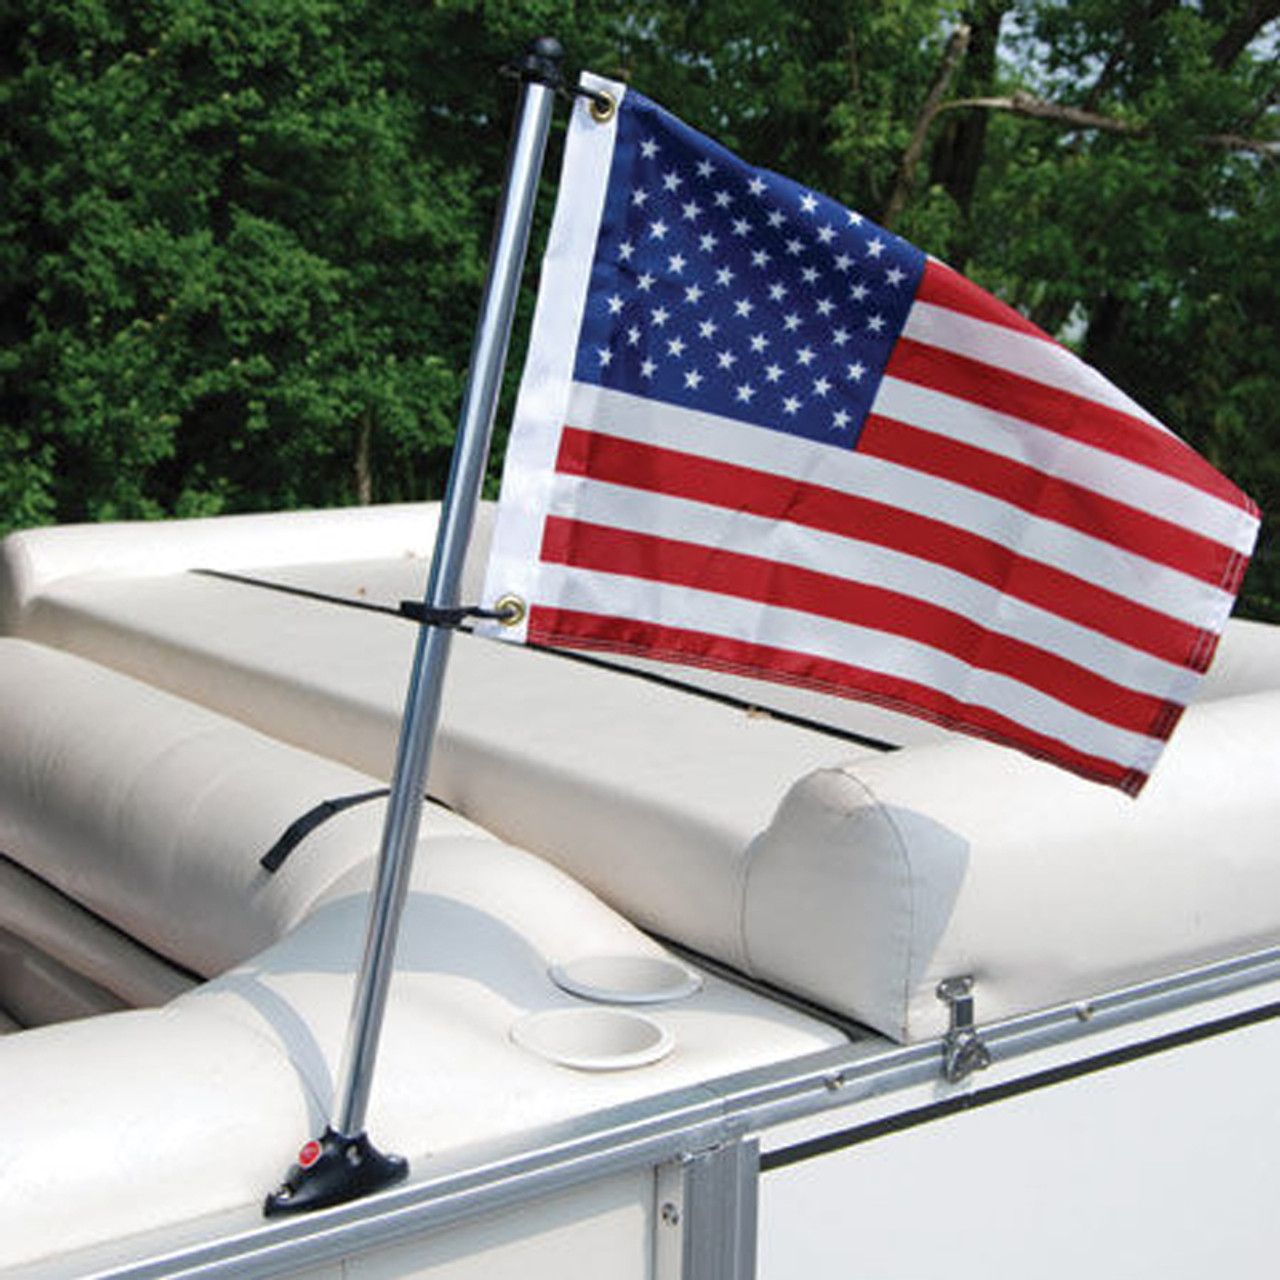 Boat Flags For Boats Review, Wooden Trawler Boats For Sale Gardens